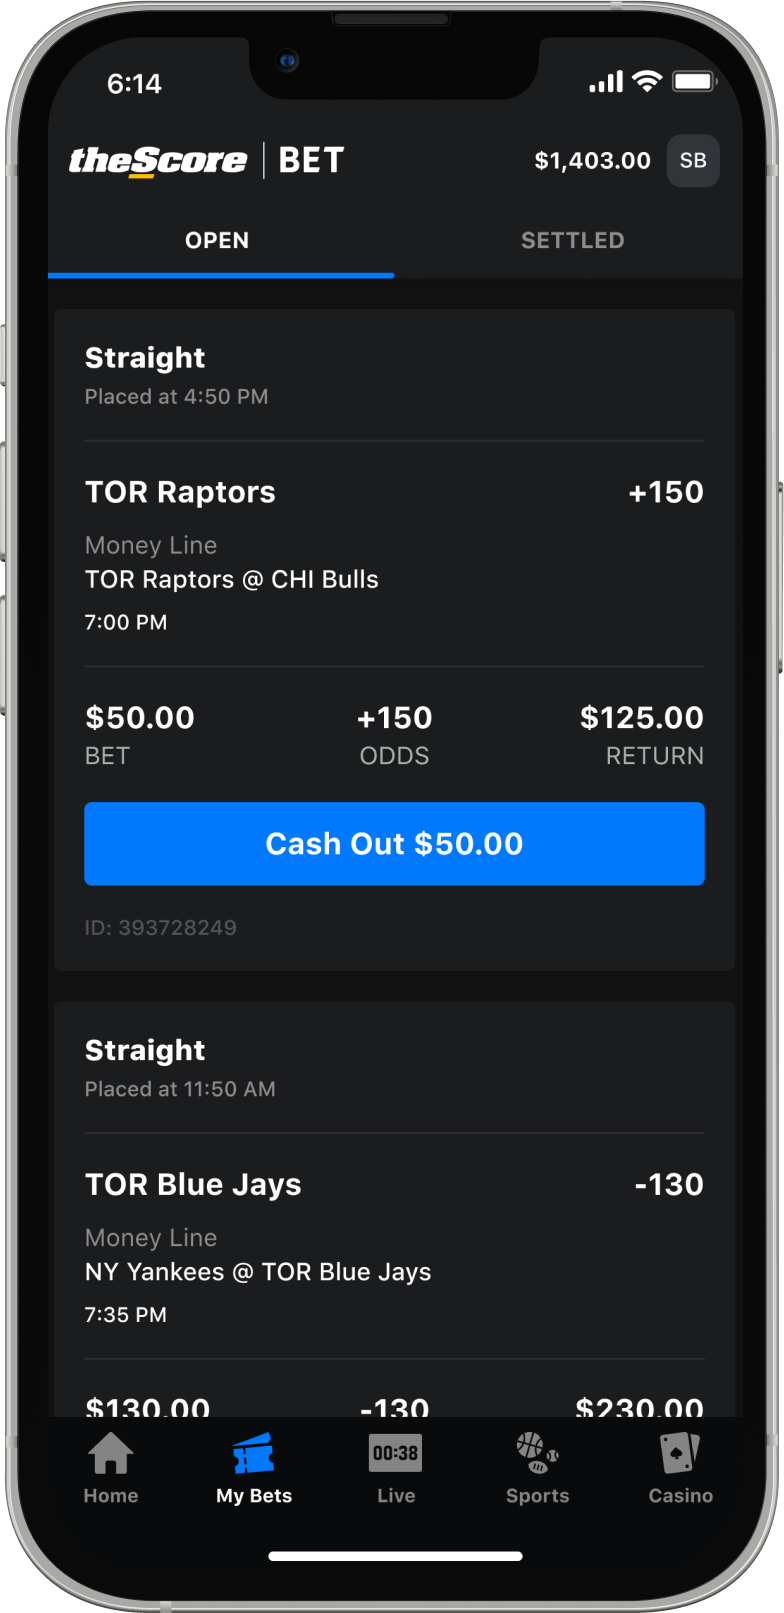 theScore Bet Matchup page